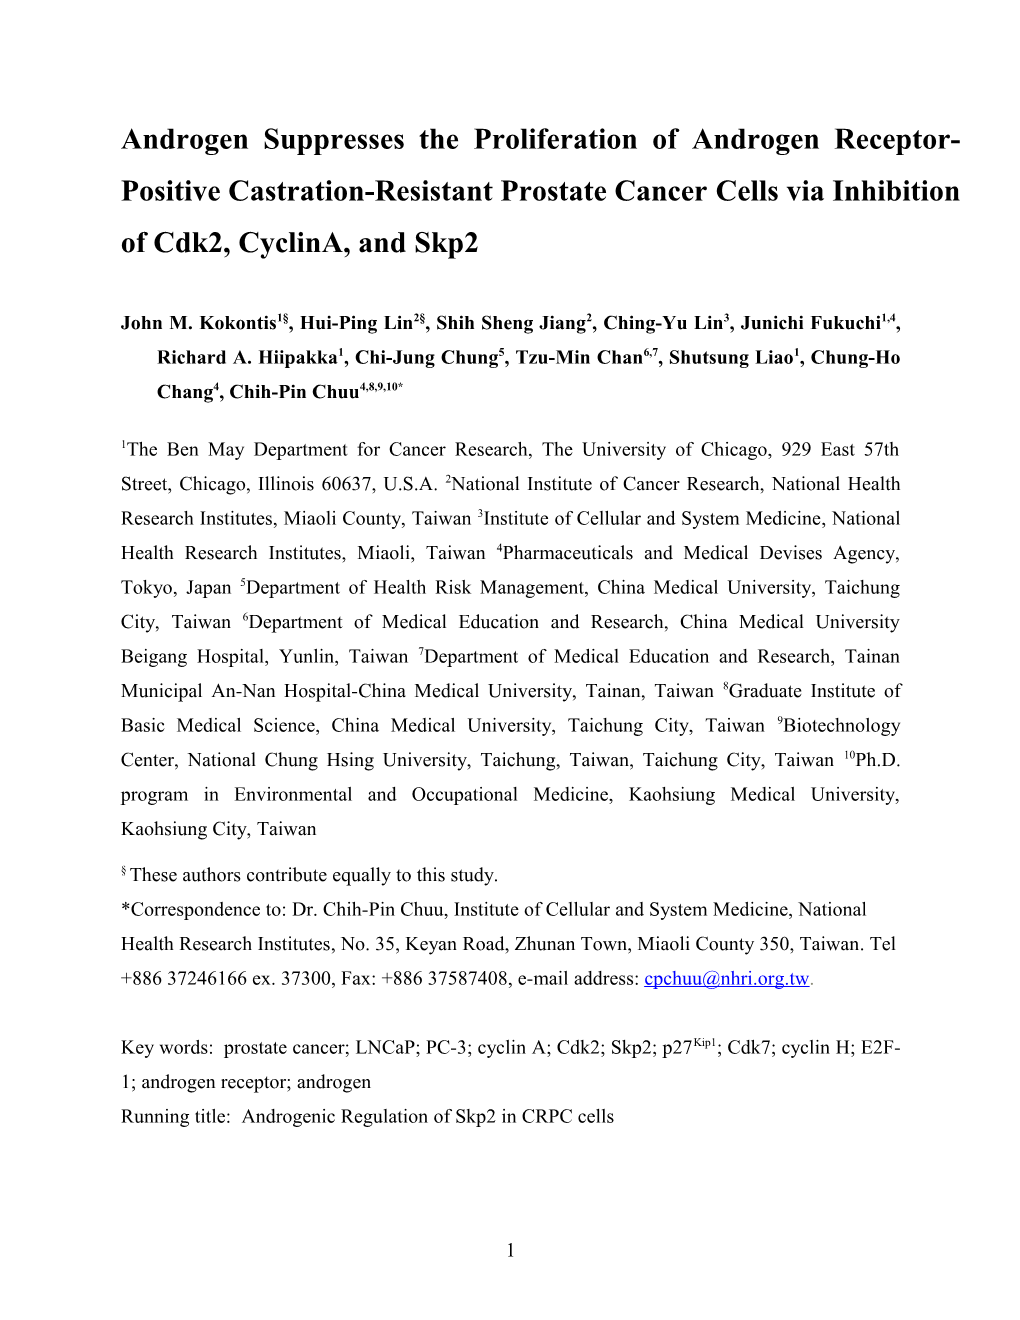 Regulation of Cdk2 Activity by Androgen in Hormone-Dependent and Independent Lncap Prostate